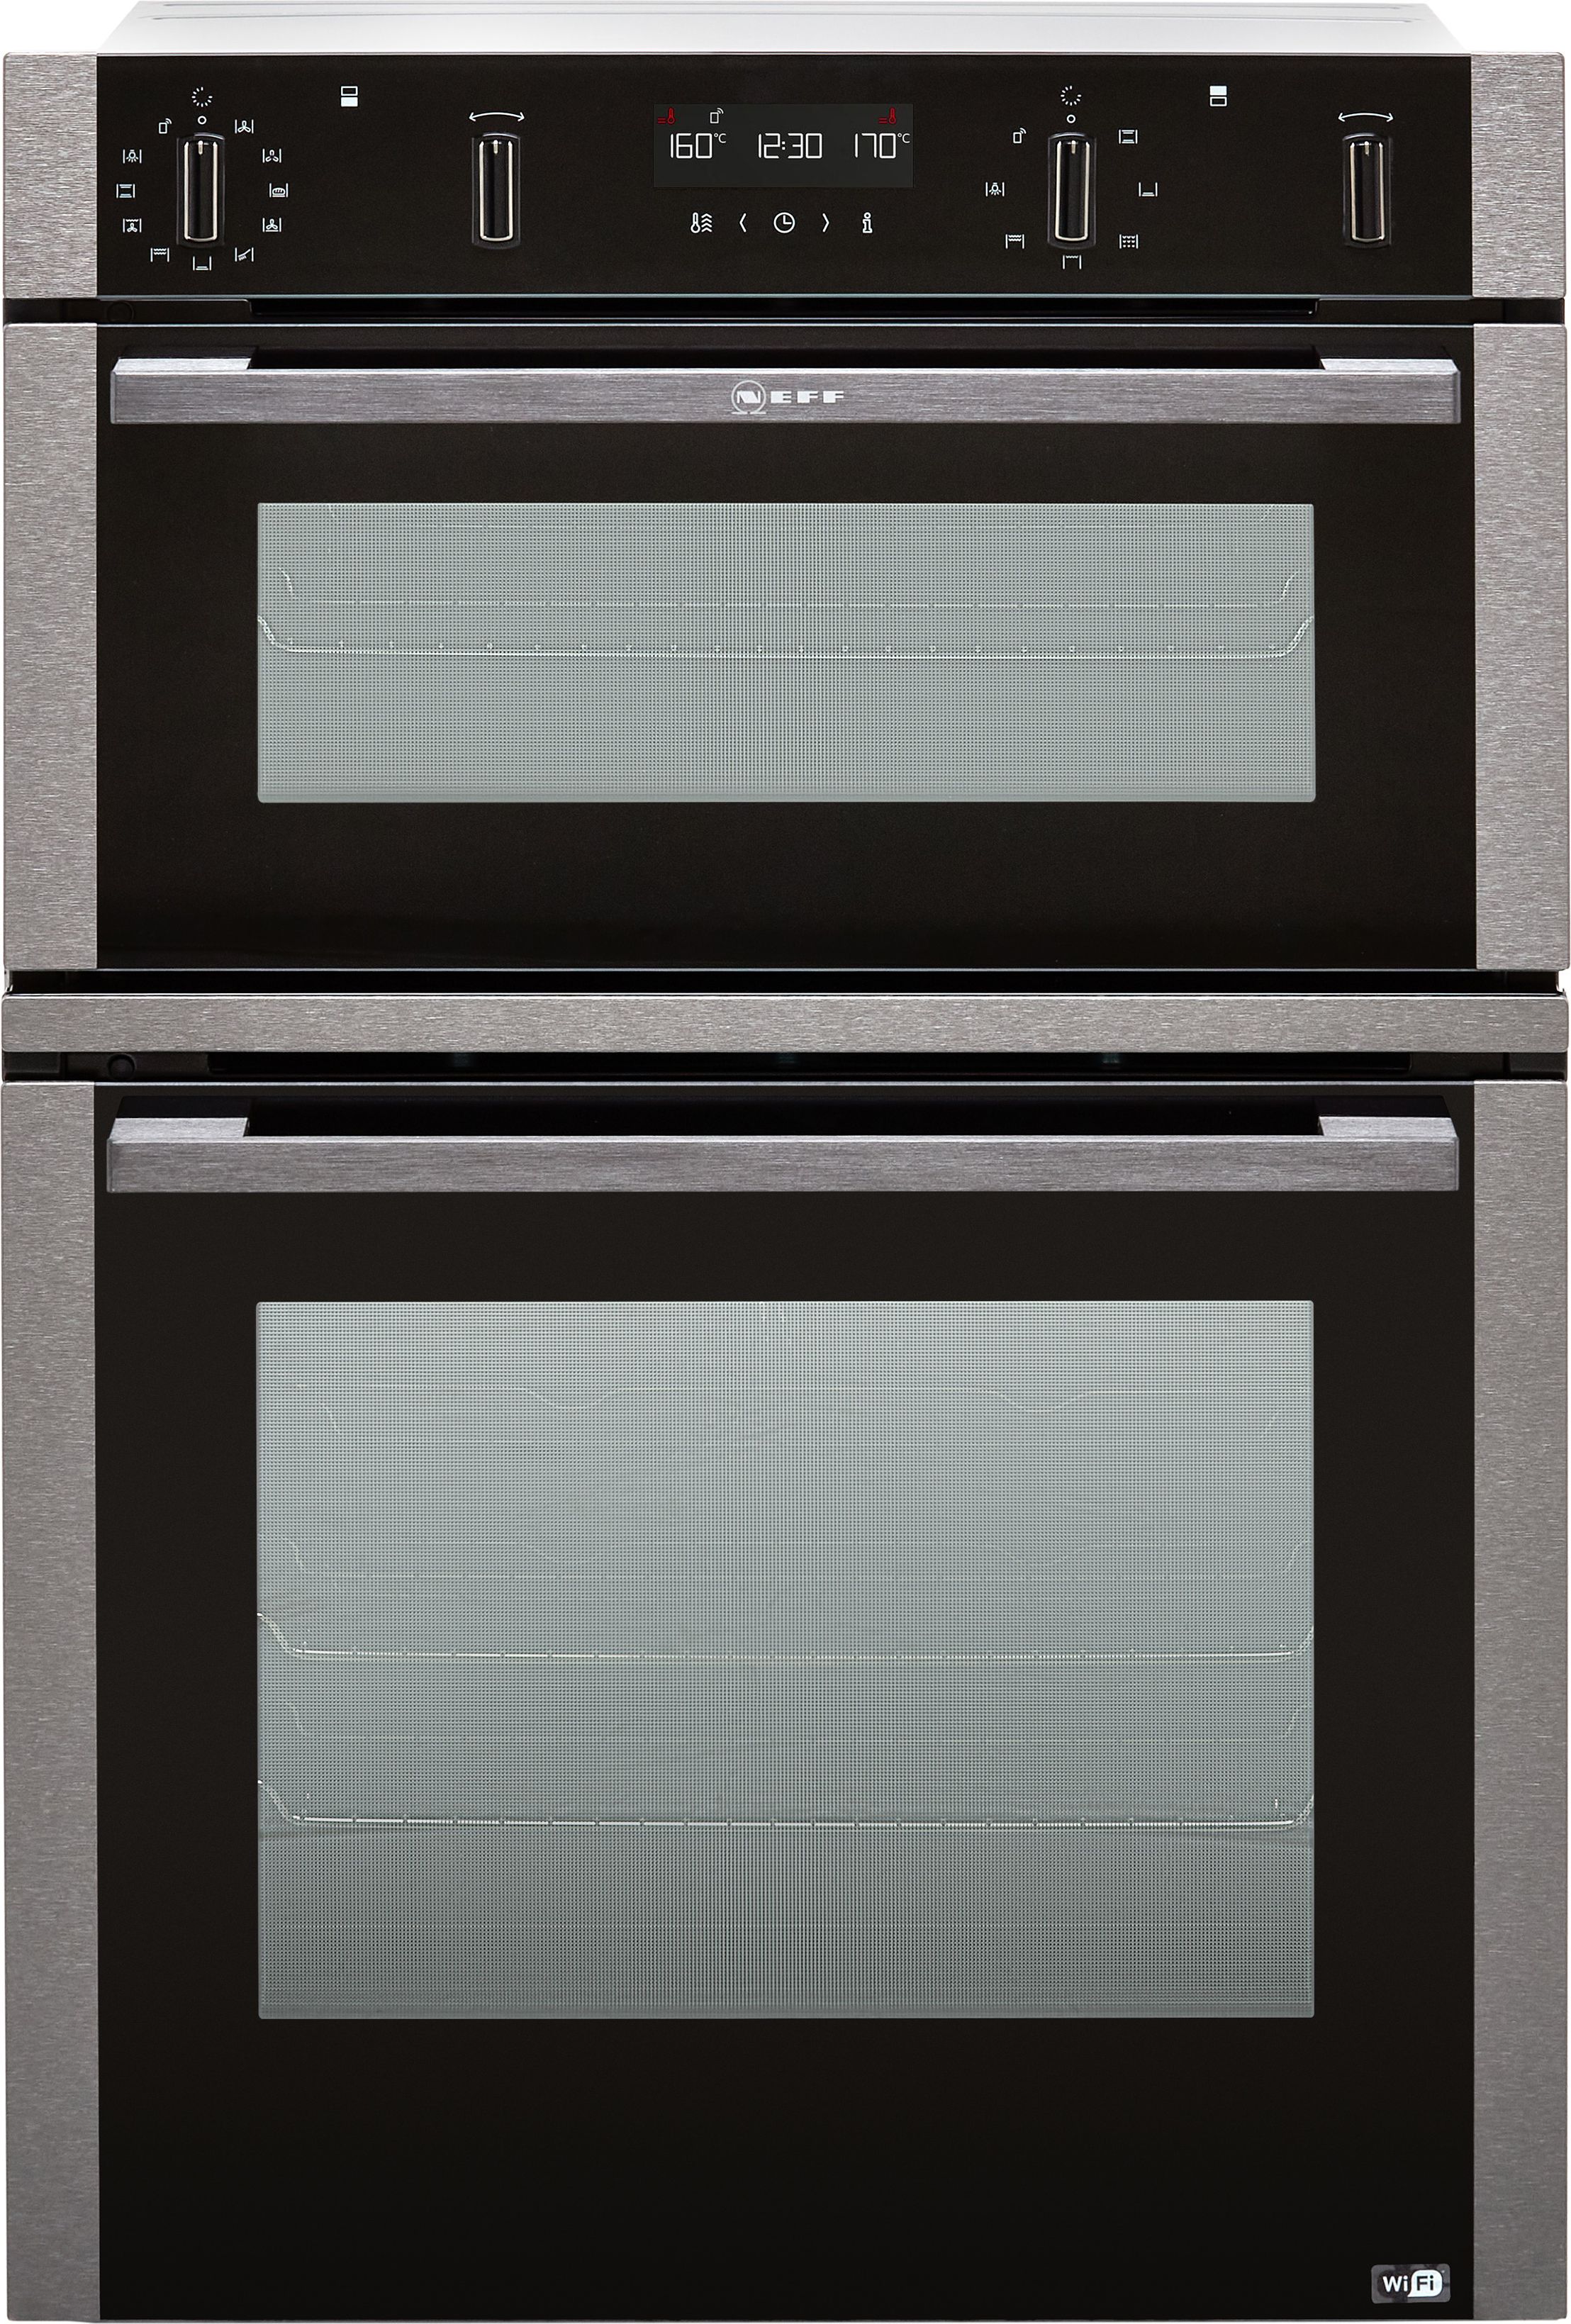 NEFF N50 U2ACM7HG0B Built In WiFi Connected Electric Double Oven with Pyrolytic Cleaning - Graphite - A/B Rated, Silver